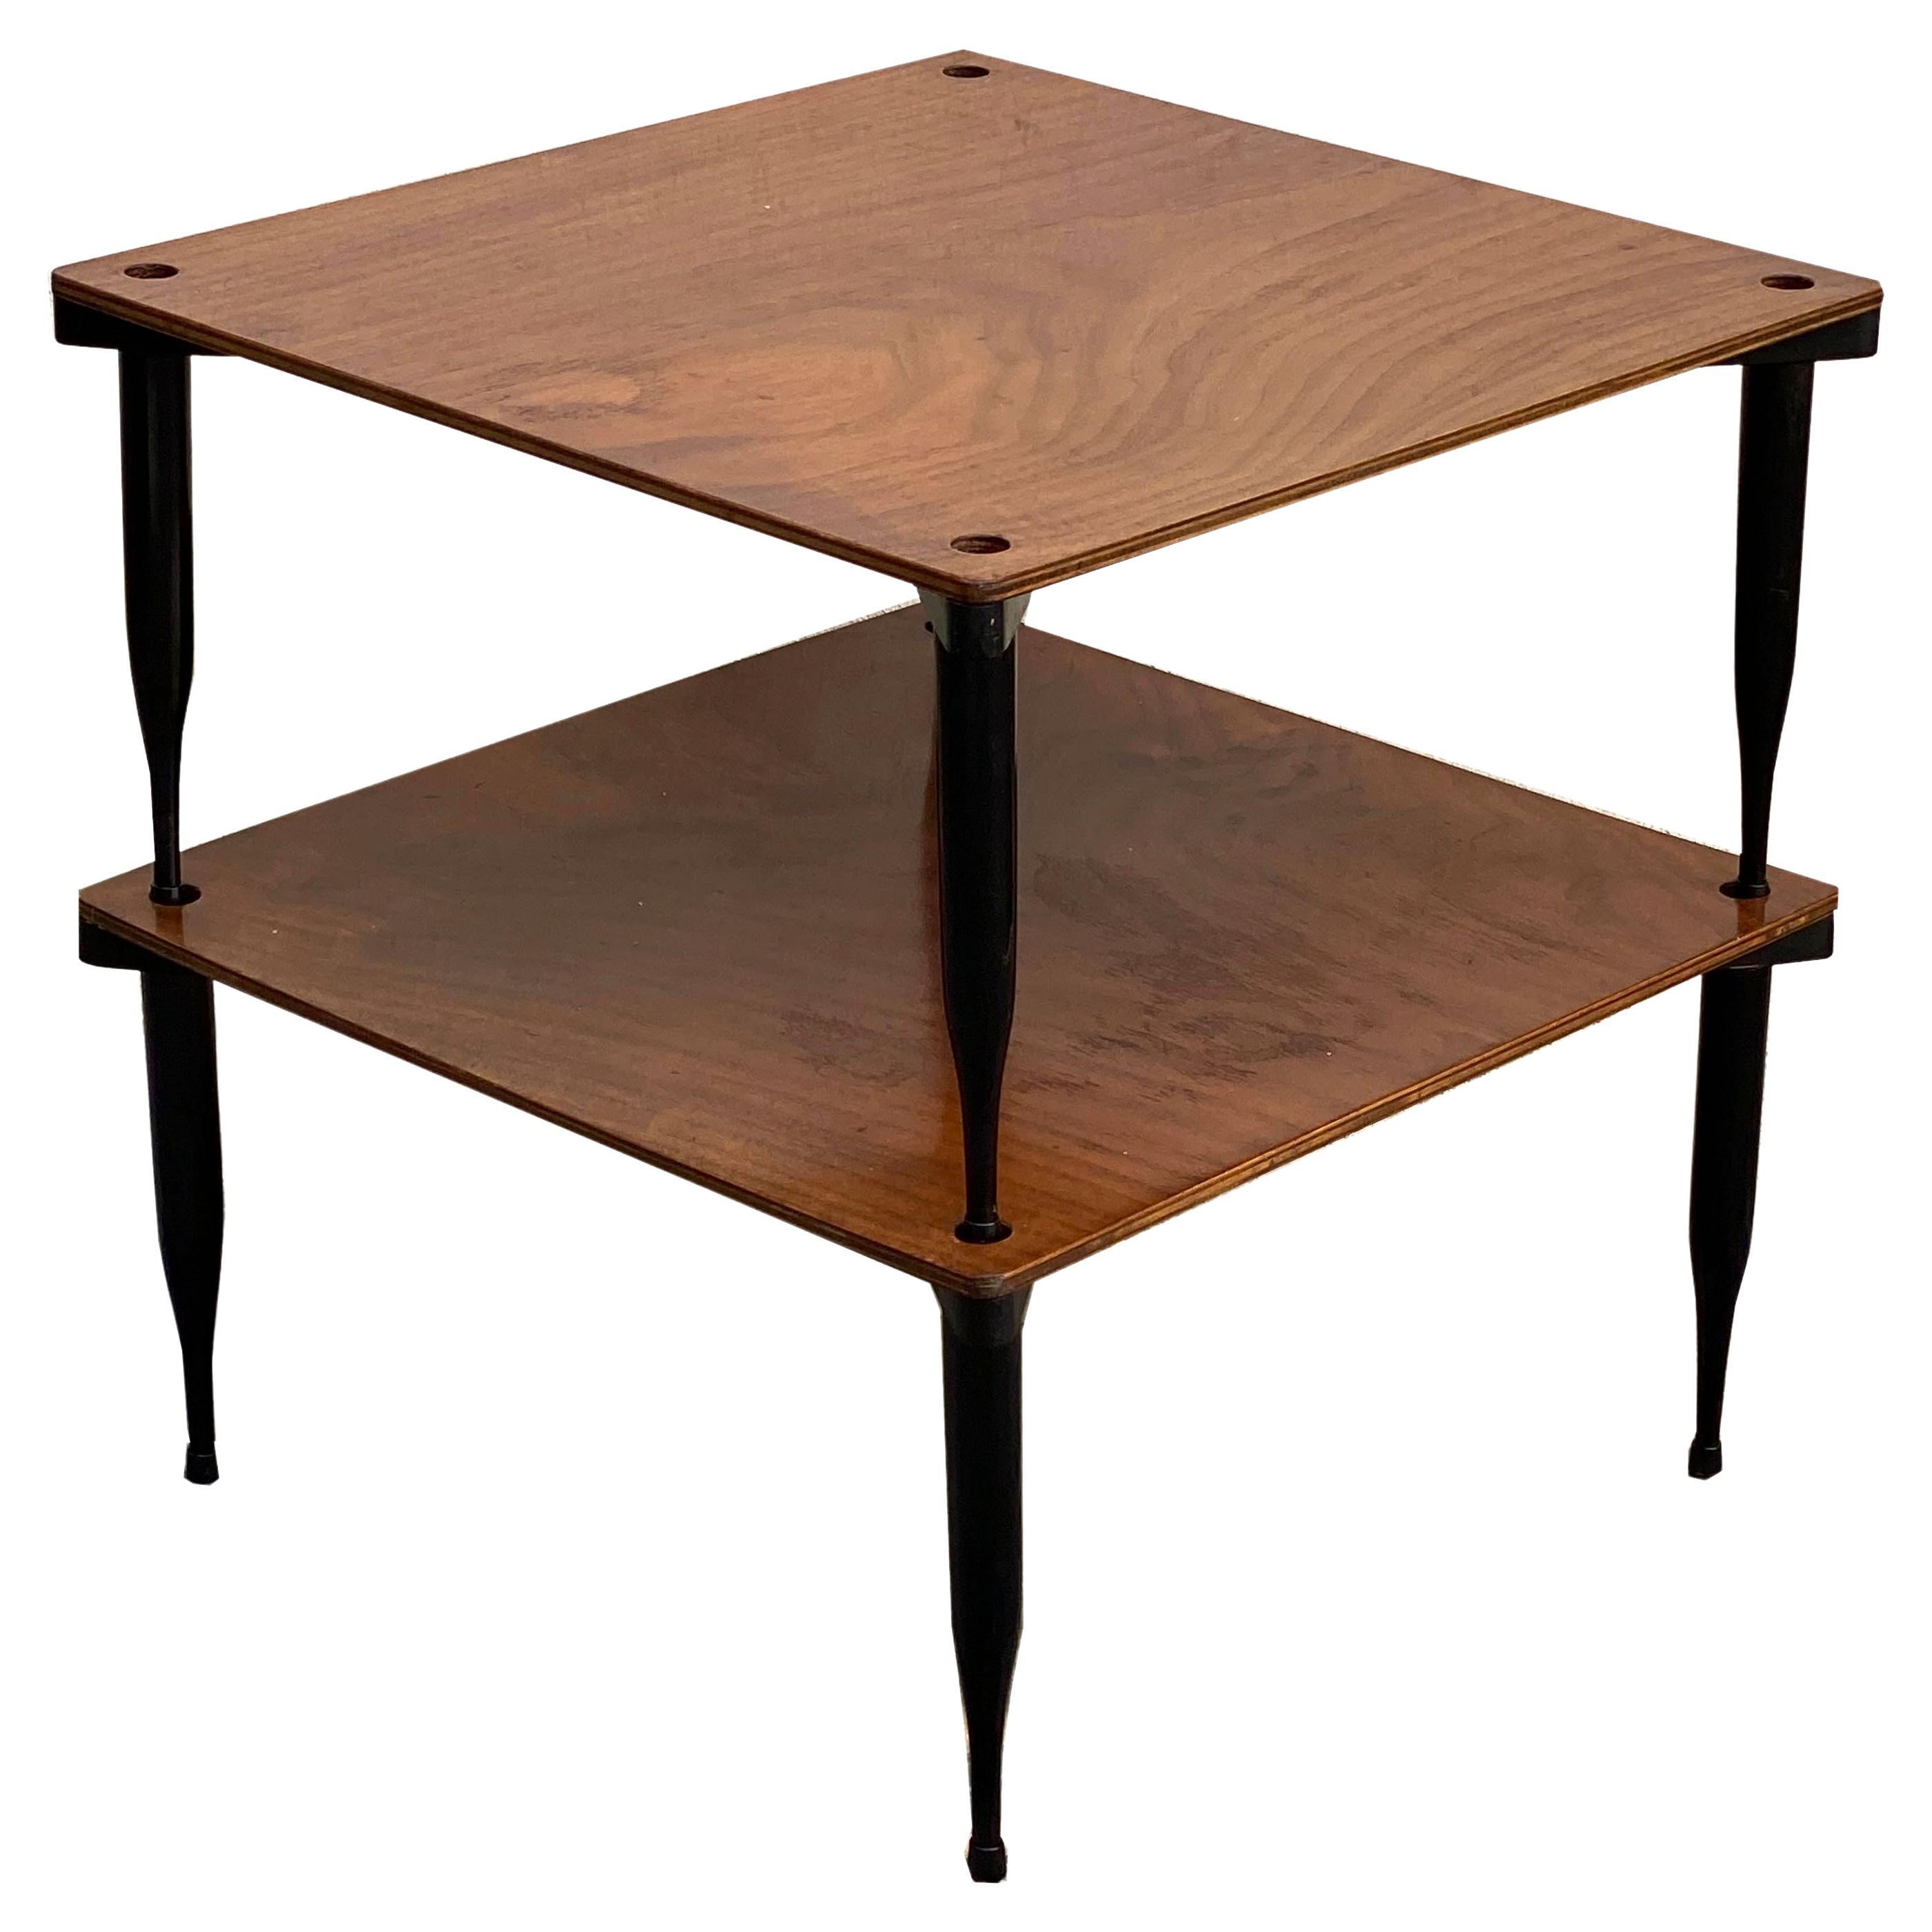 Vico Magistretti for Azucena Stackable Tables T8, Italy 1954